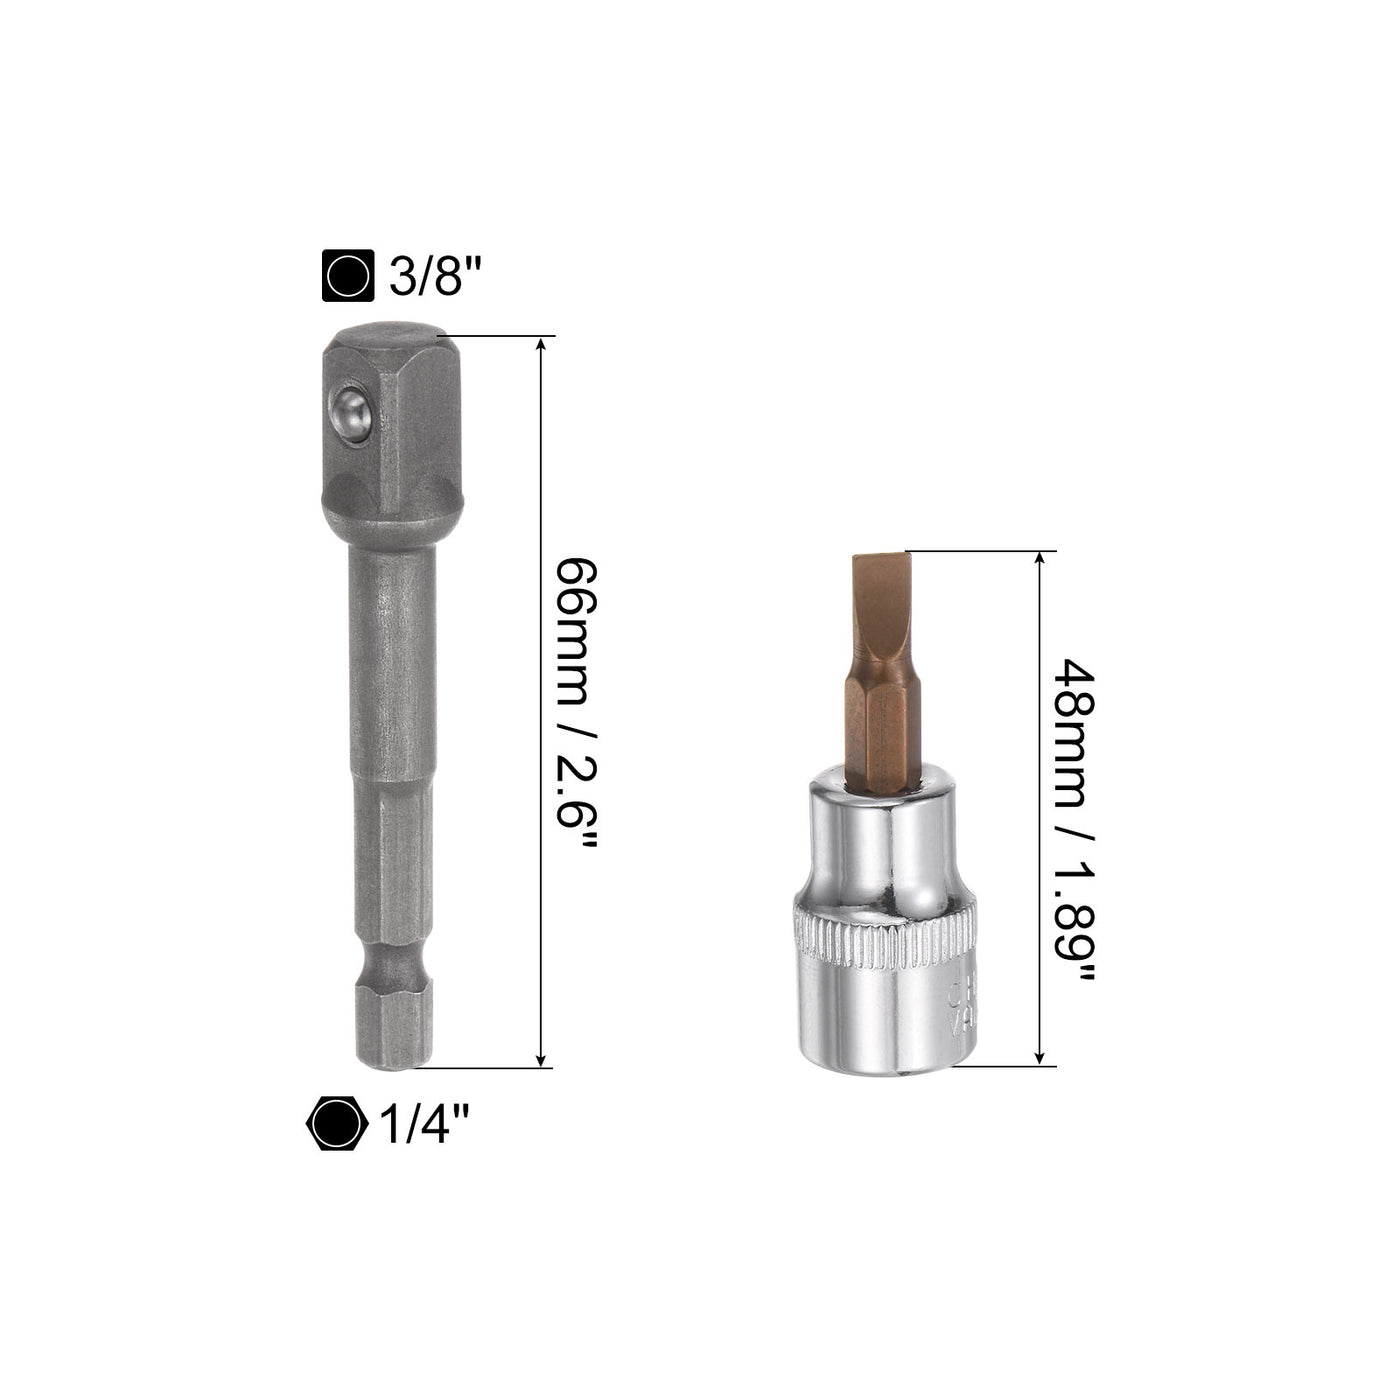 uxcell Uxcell FD5.5 Slotted Bit Socket 3/8" Drive 1.89" Length W Hex Shank Power Drill Adapter